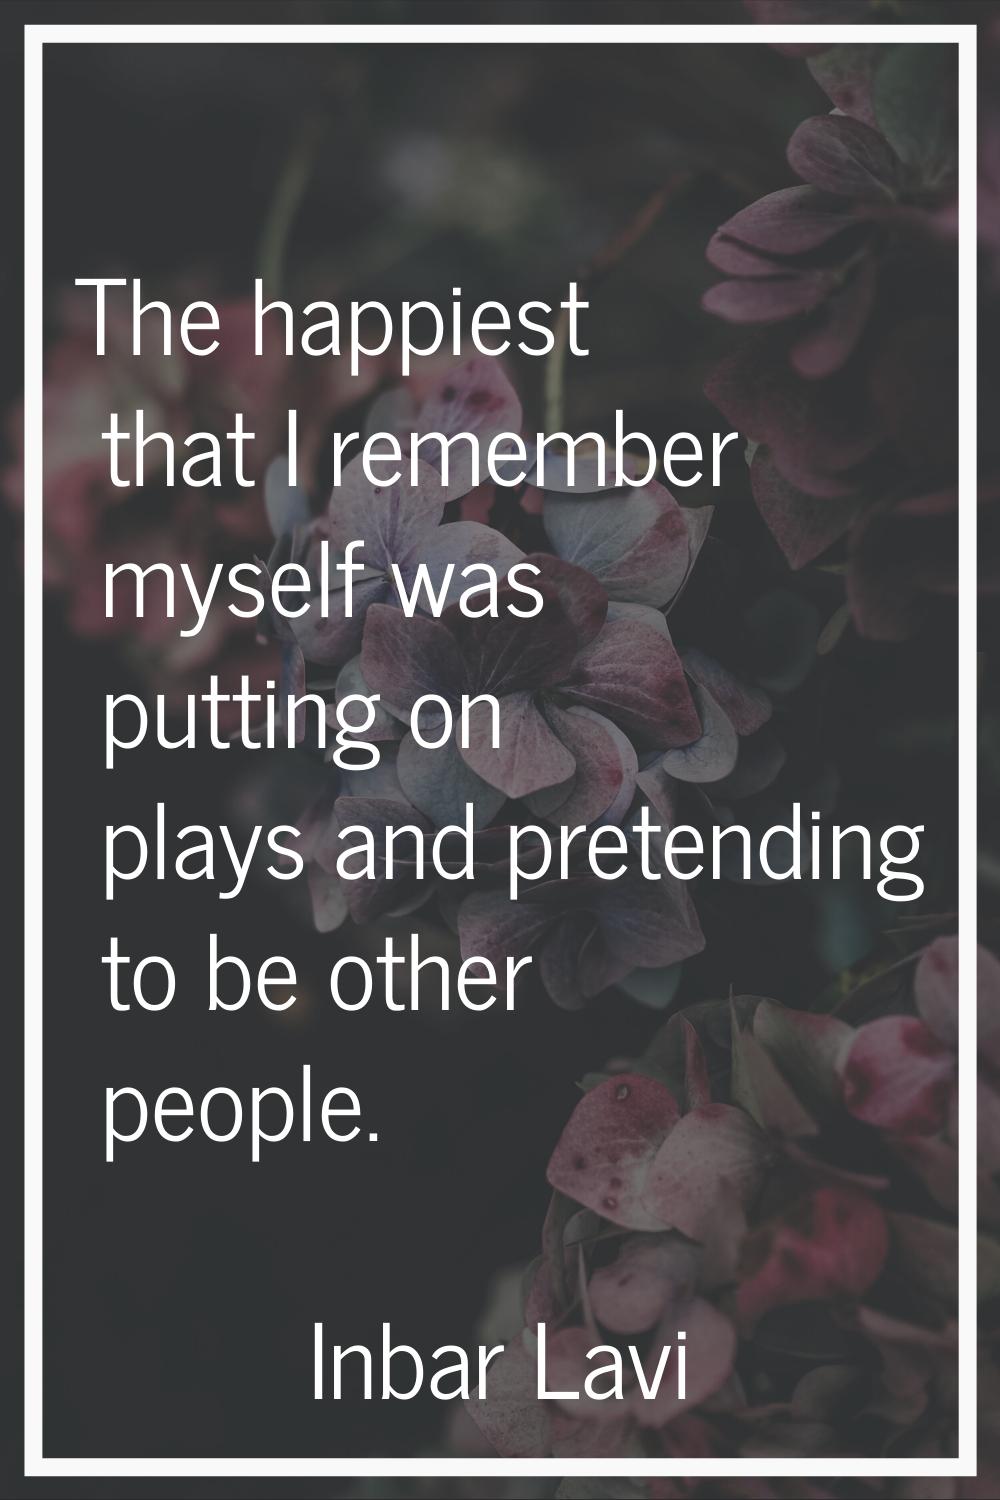 The happiest that I remember myself was putting on plays and pretending to be other people.